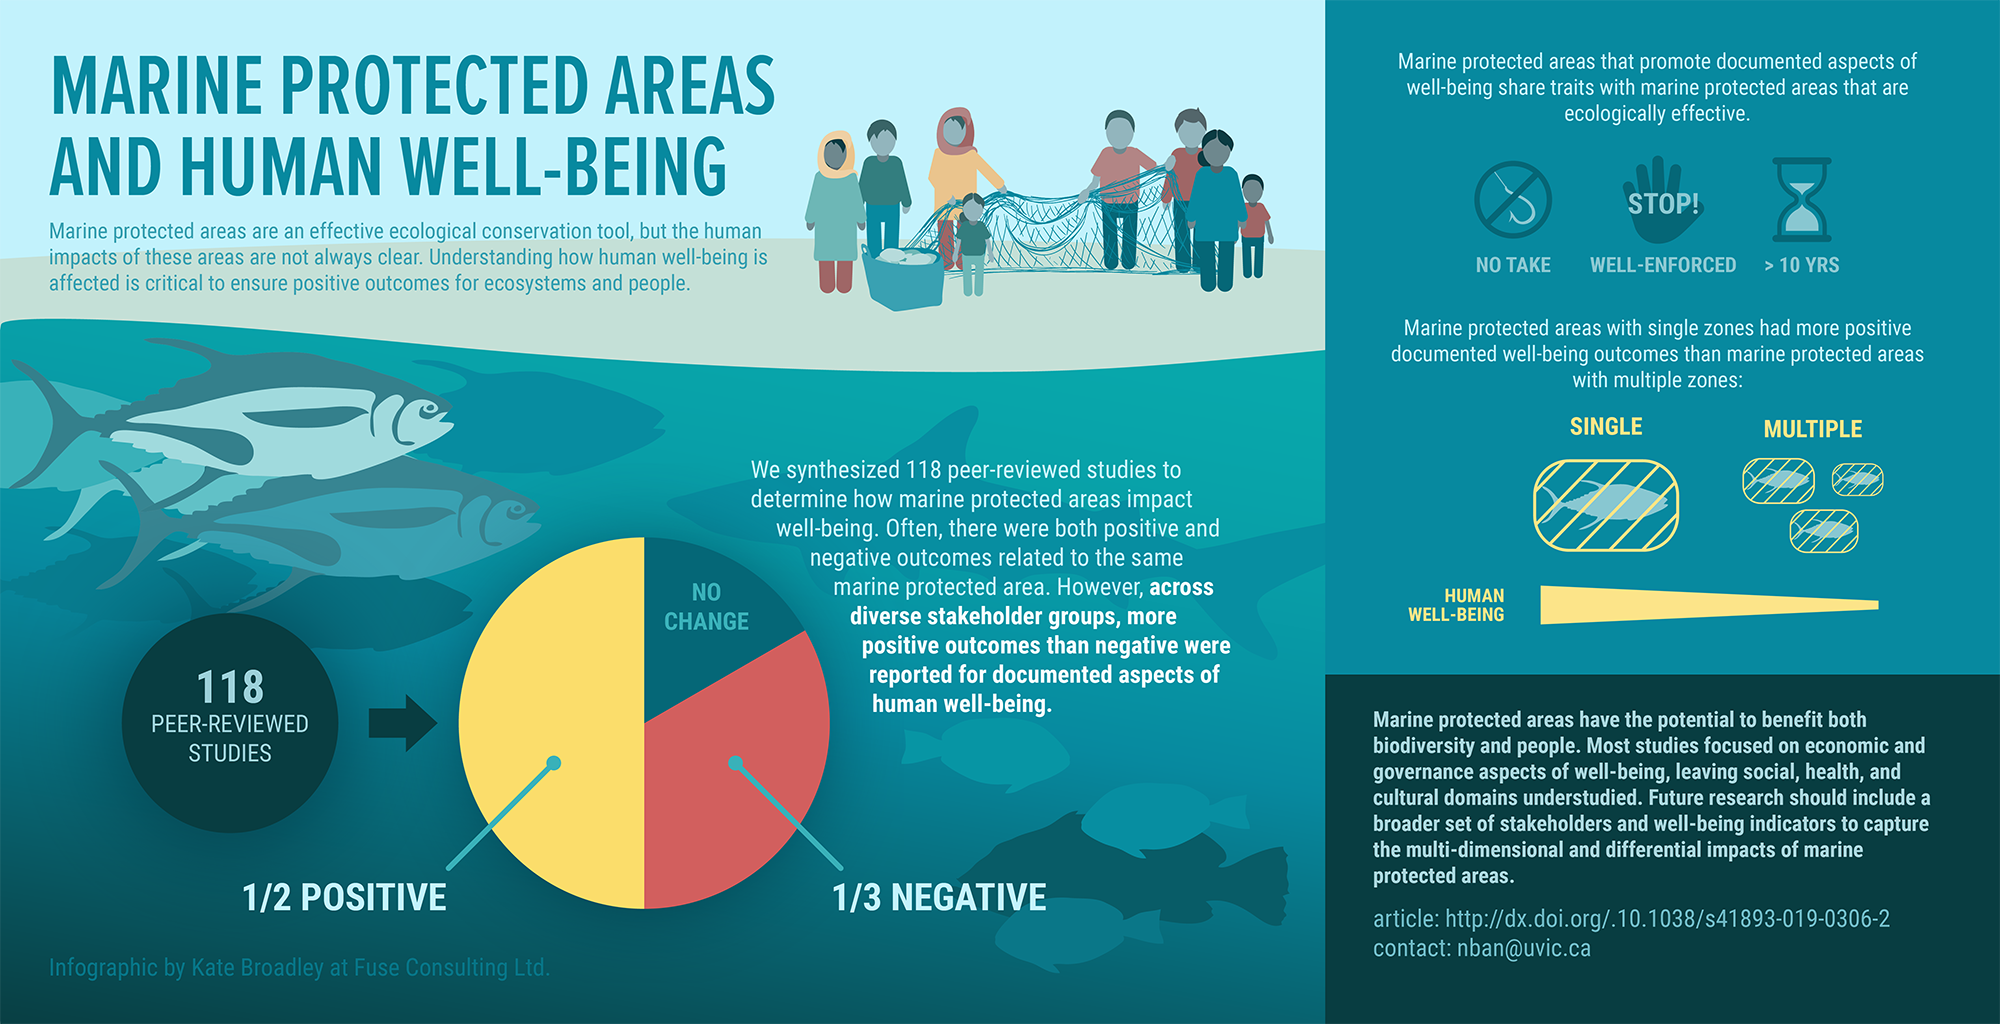 Marine protected areas can improve both human well-being and